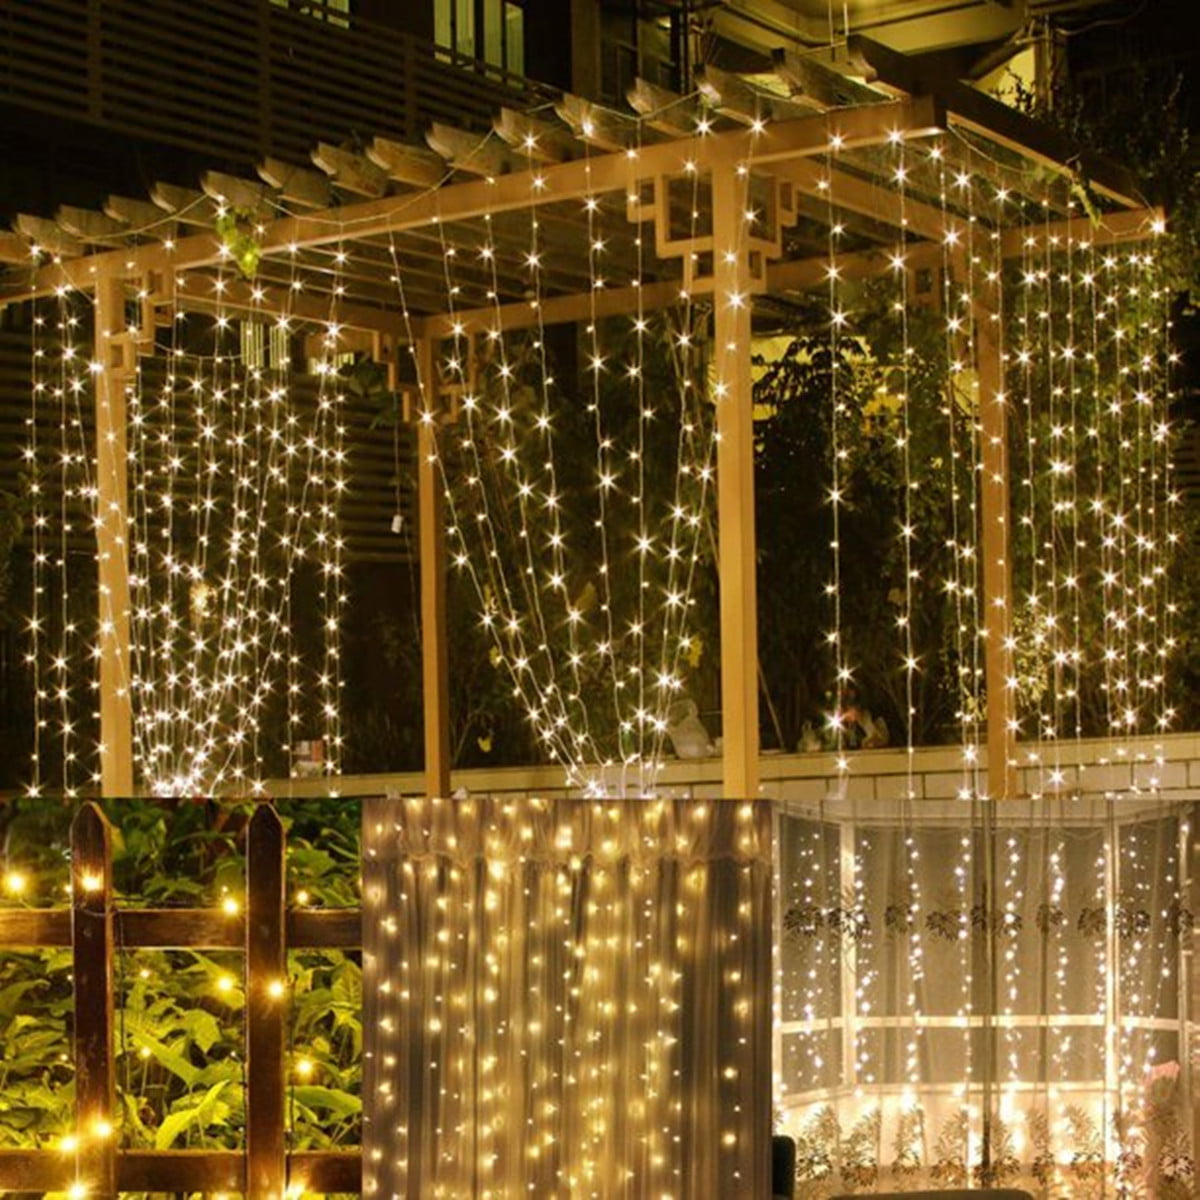 Waterproof LED Fairy String Lights Copper Wire Flexible Outdoor Lights for Xtmas 